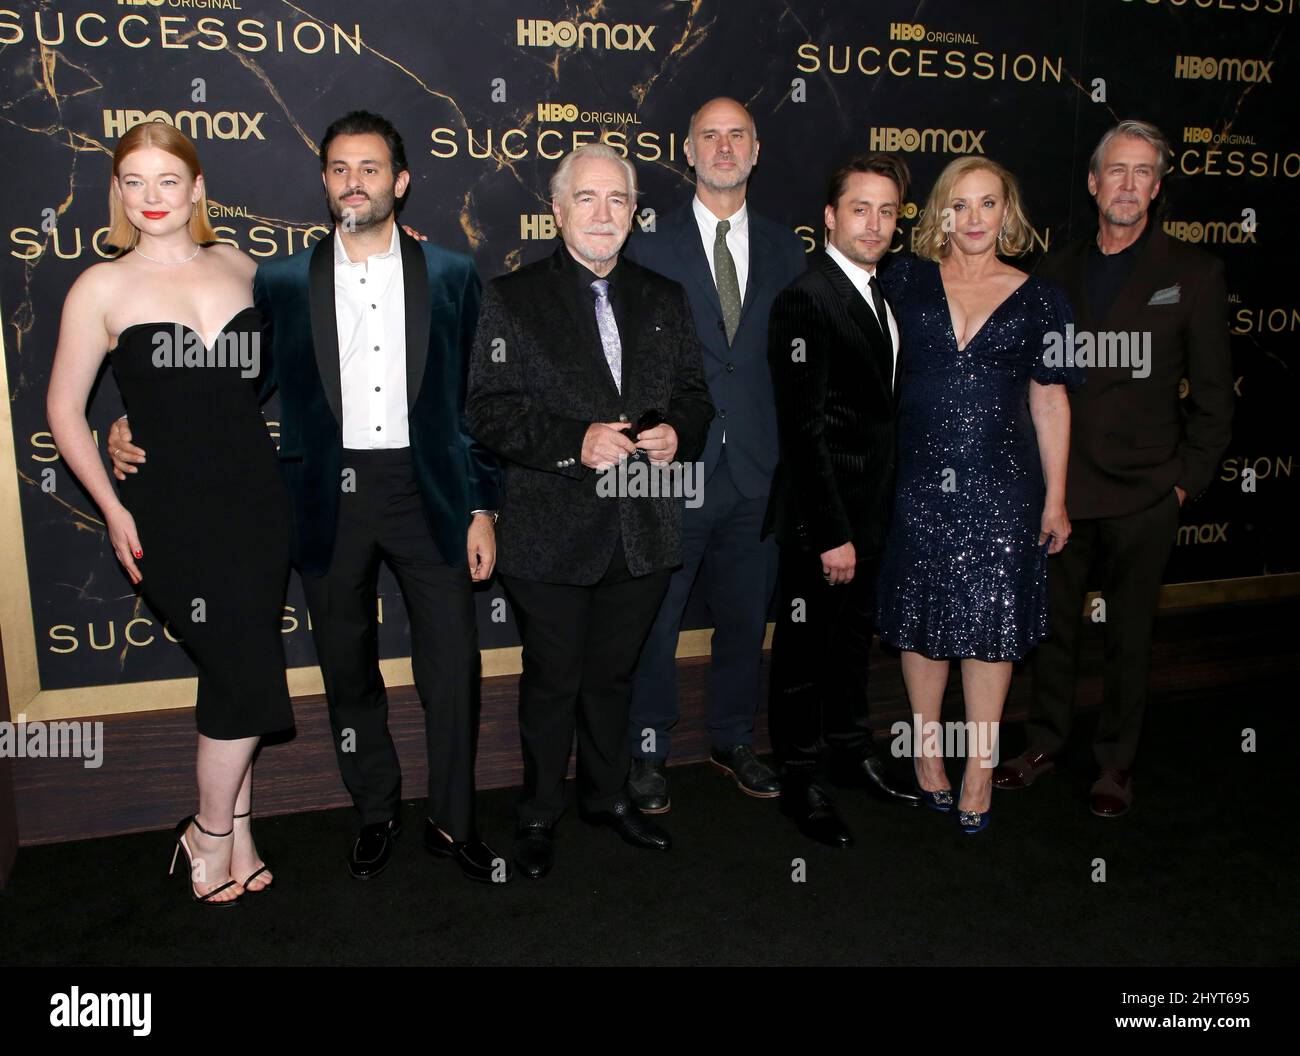 Sarah Snook, Arian Moayed, Brian Cox, Jesse Armstrong, Kieran Culkin, J. Smith Cameron and Alan Ruck attending the 'Succession' Season 3 Premiere held at the Museum of Natural History on October 12, 2021 in New York City, NY Stock Photo